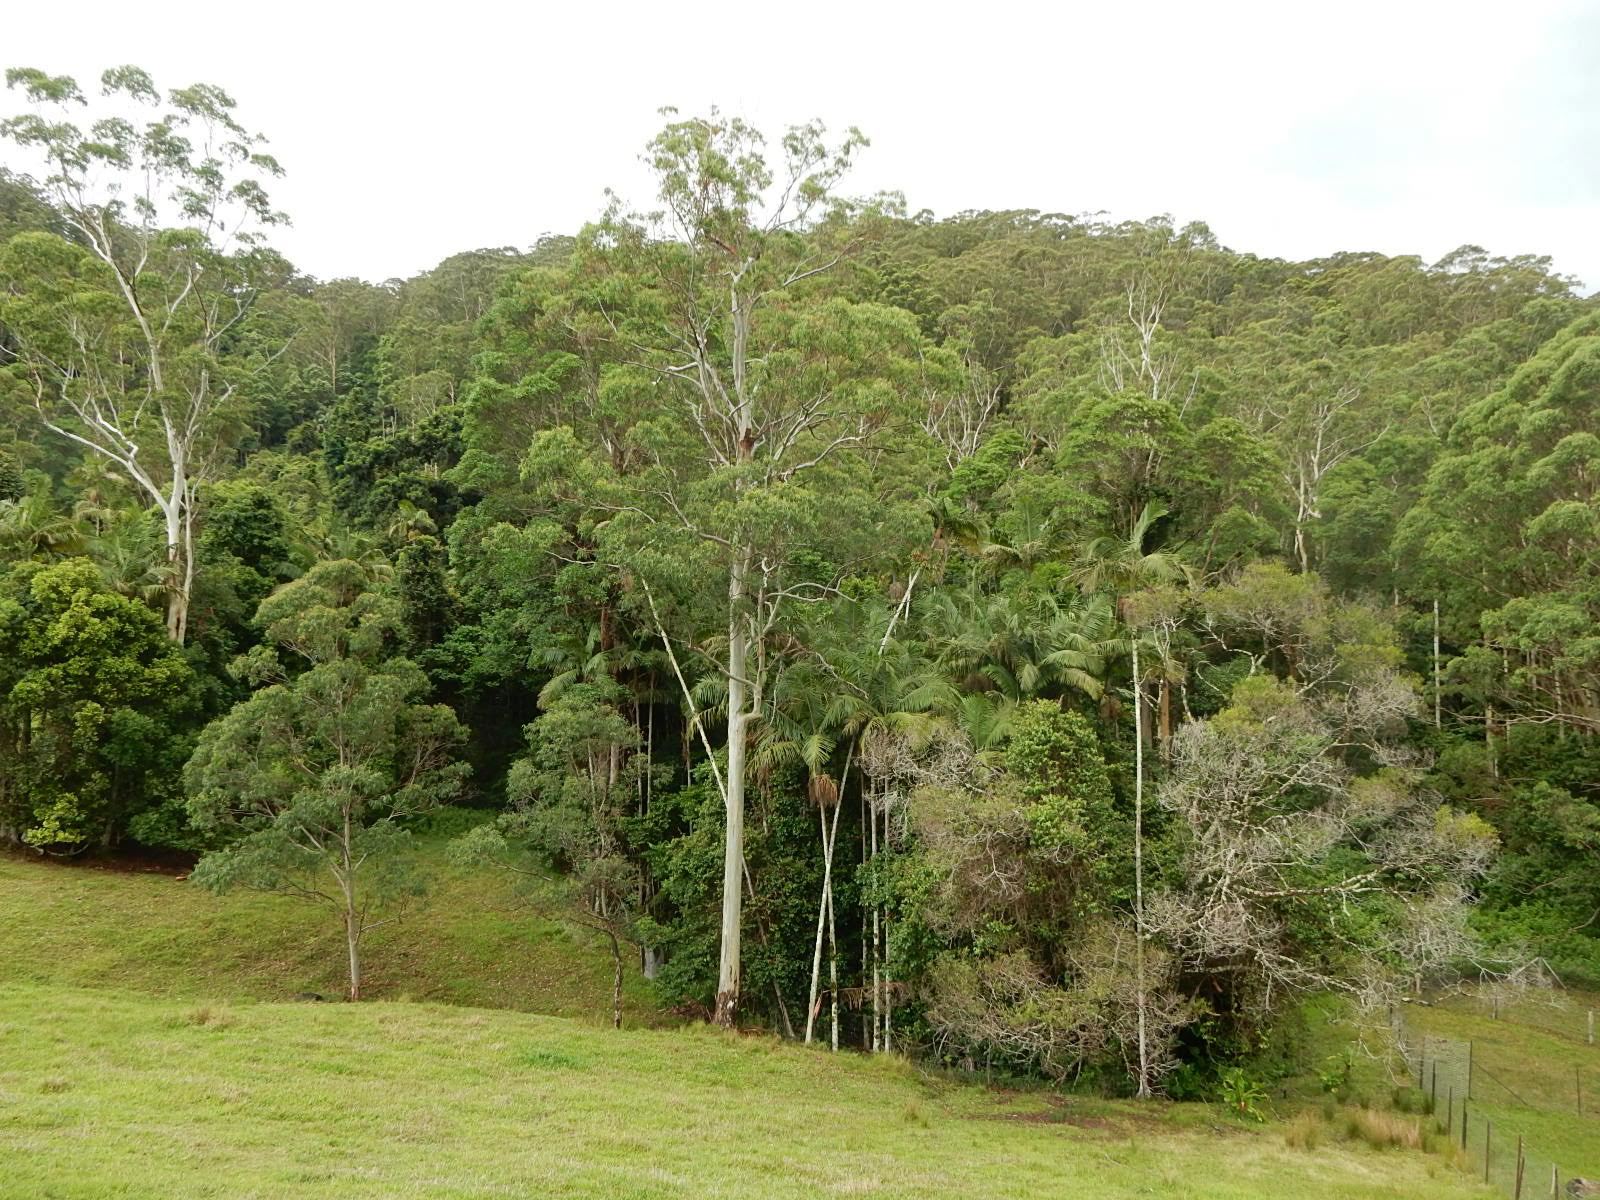 The Copelands live on a property "surrounded by bush", about 10 kilometers from Coffs Harbour.